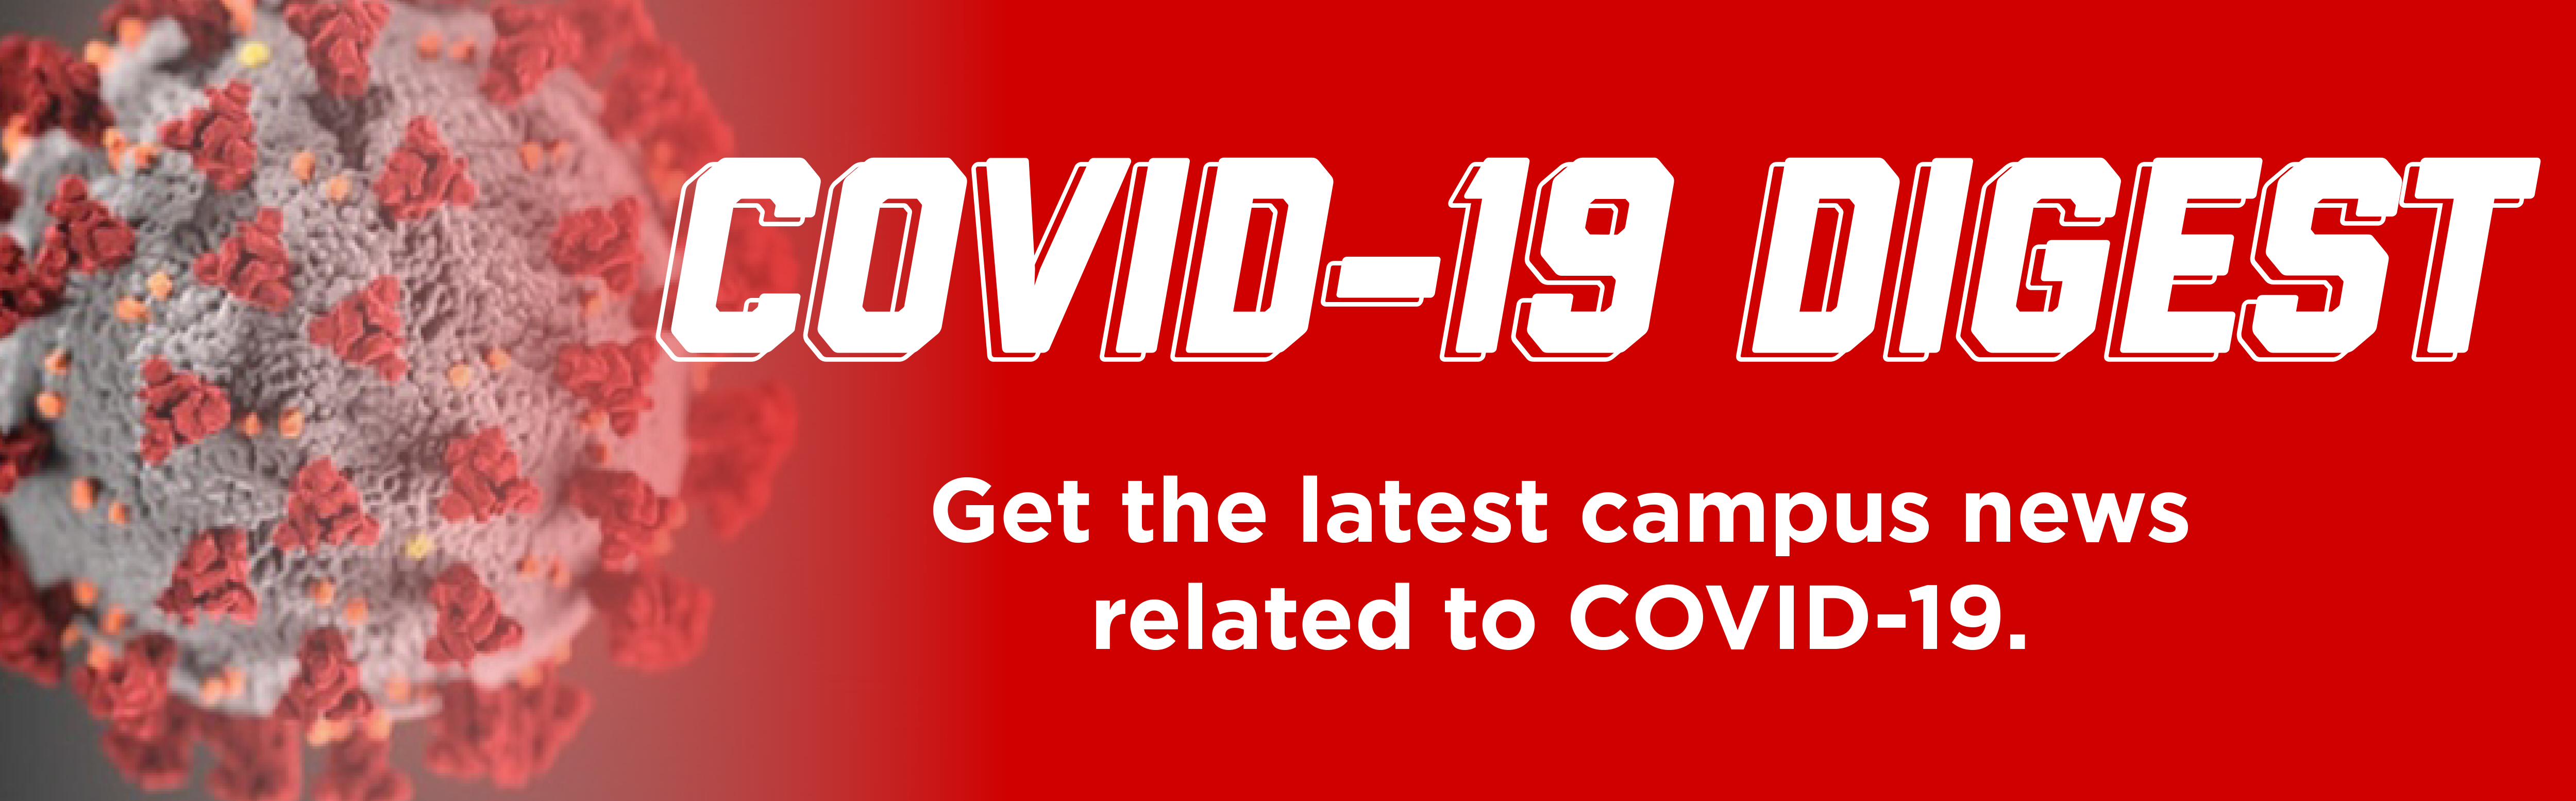 COVID-19 Digest. Get the latest campus news related to COVID-19. Click to learn more.